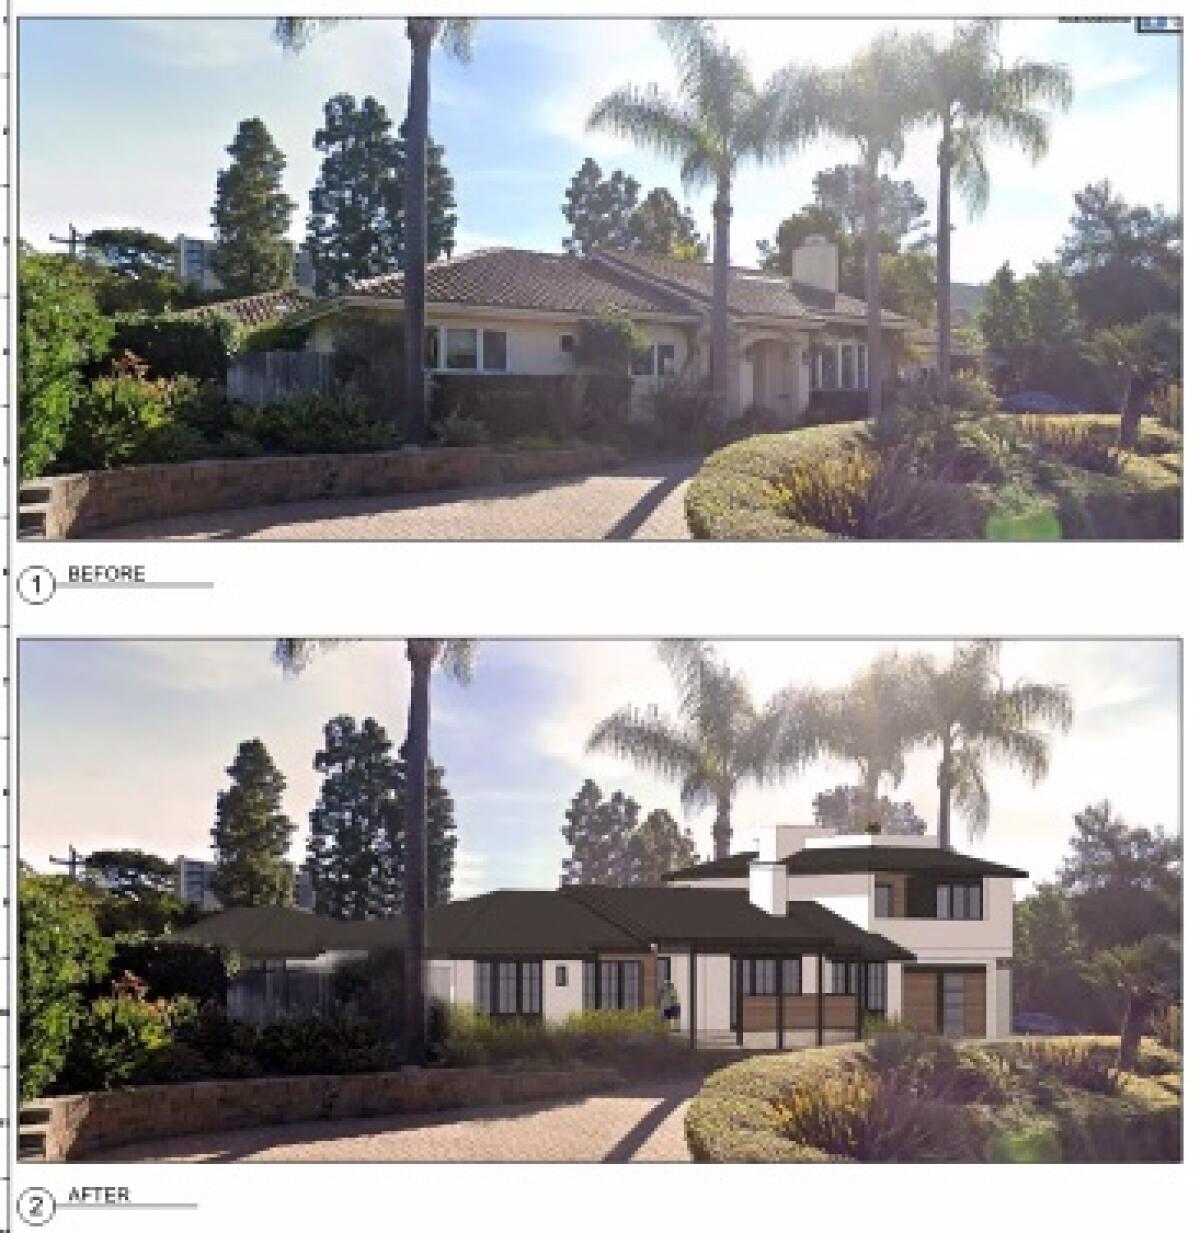 Before-and-after images depict the planned renovation of 7981 Dorado Court in La Jolla Shores.